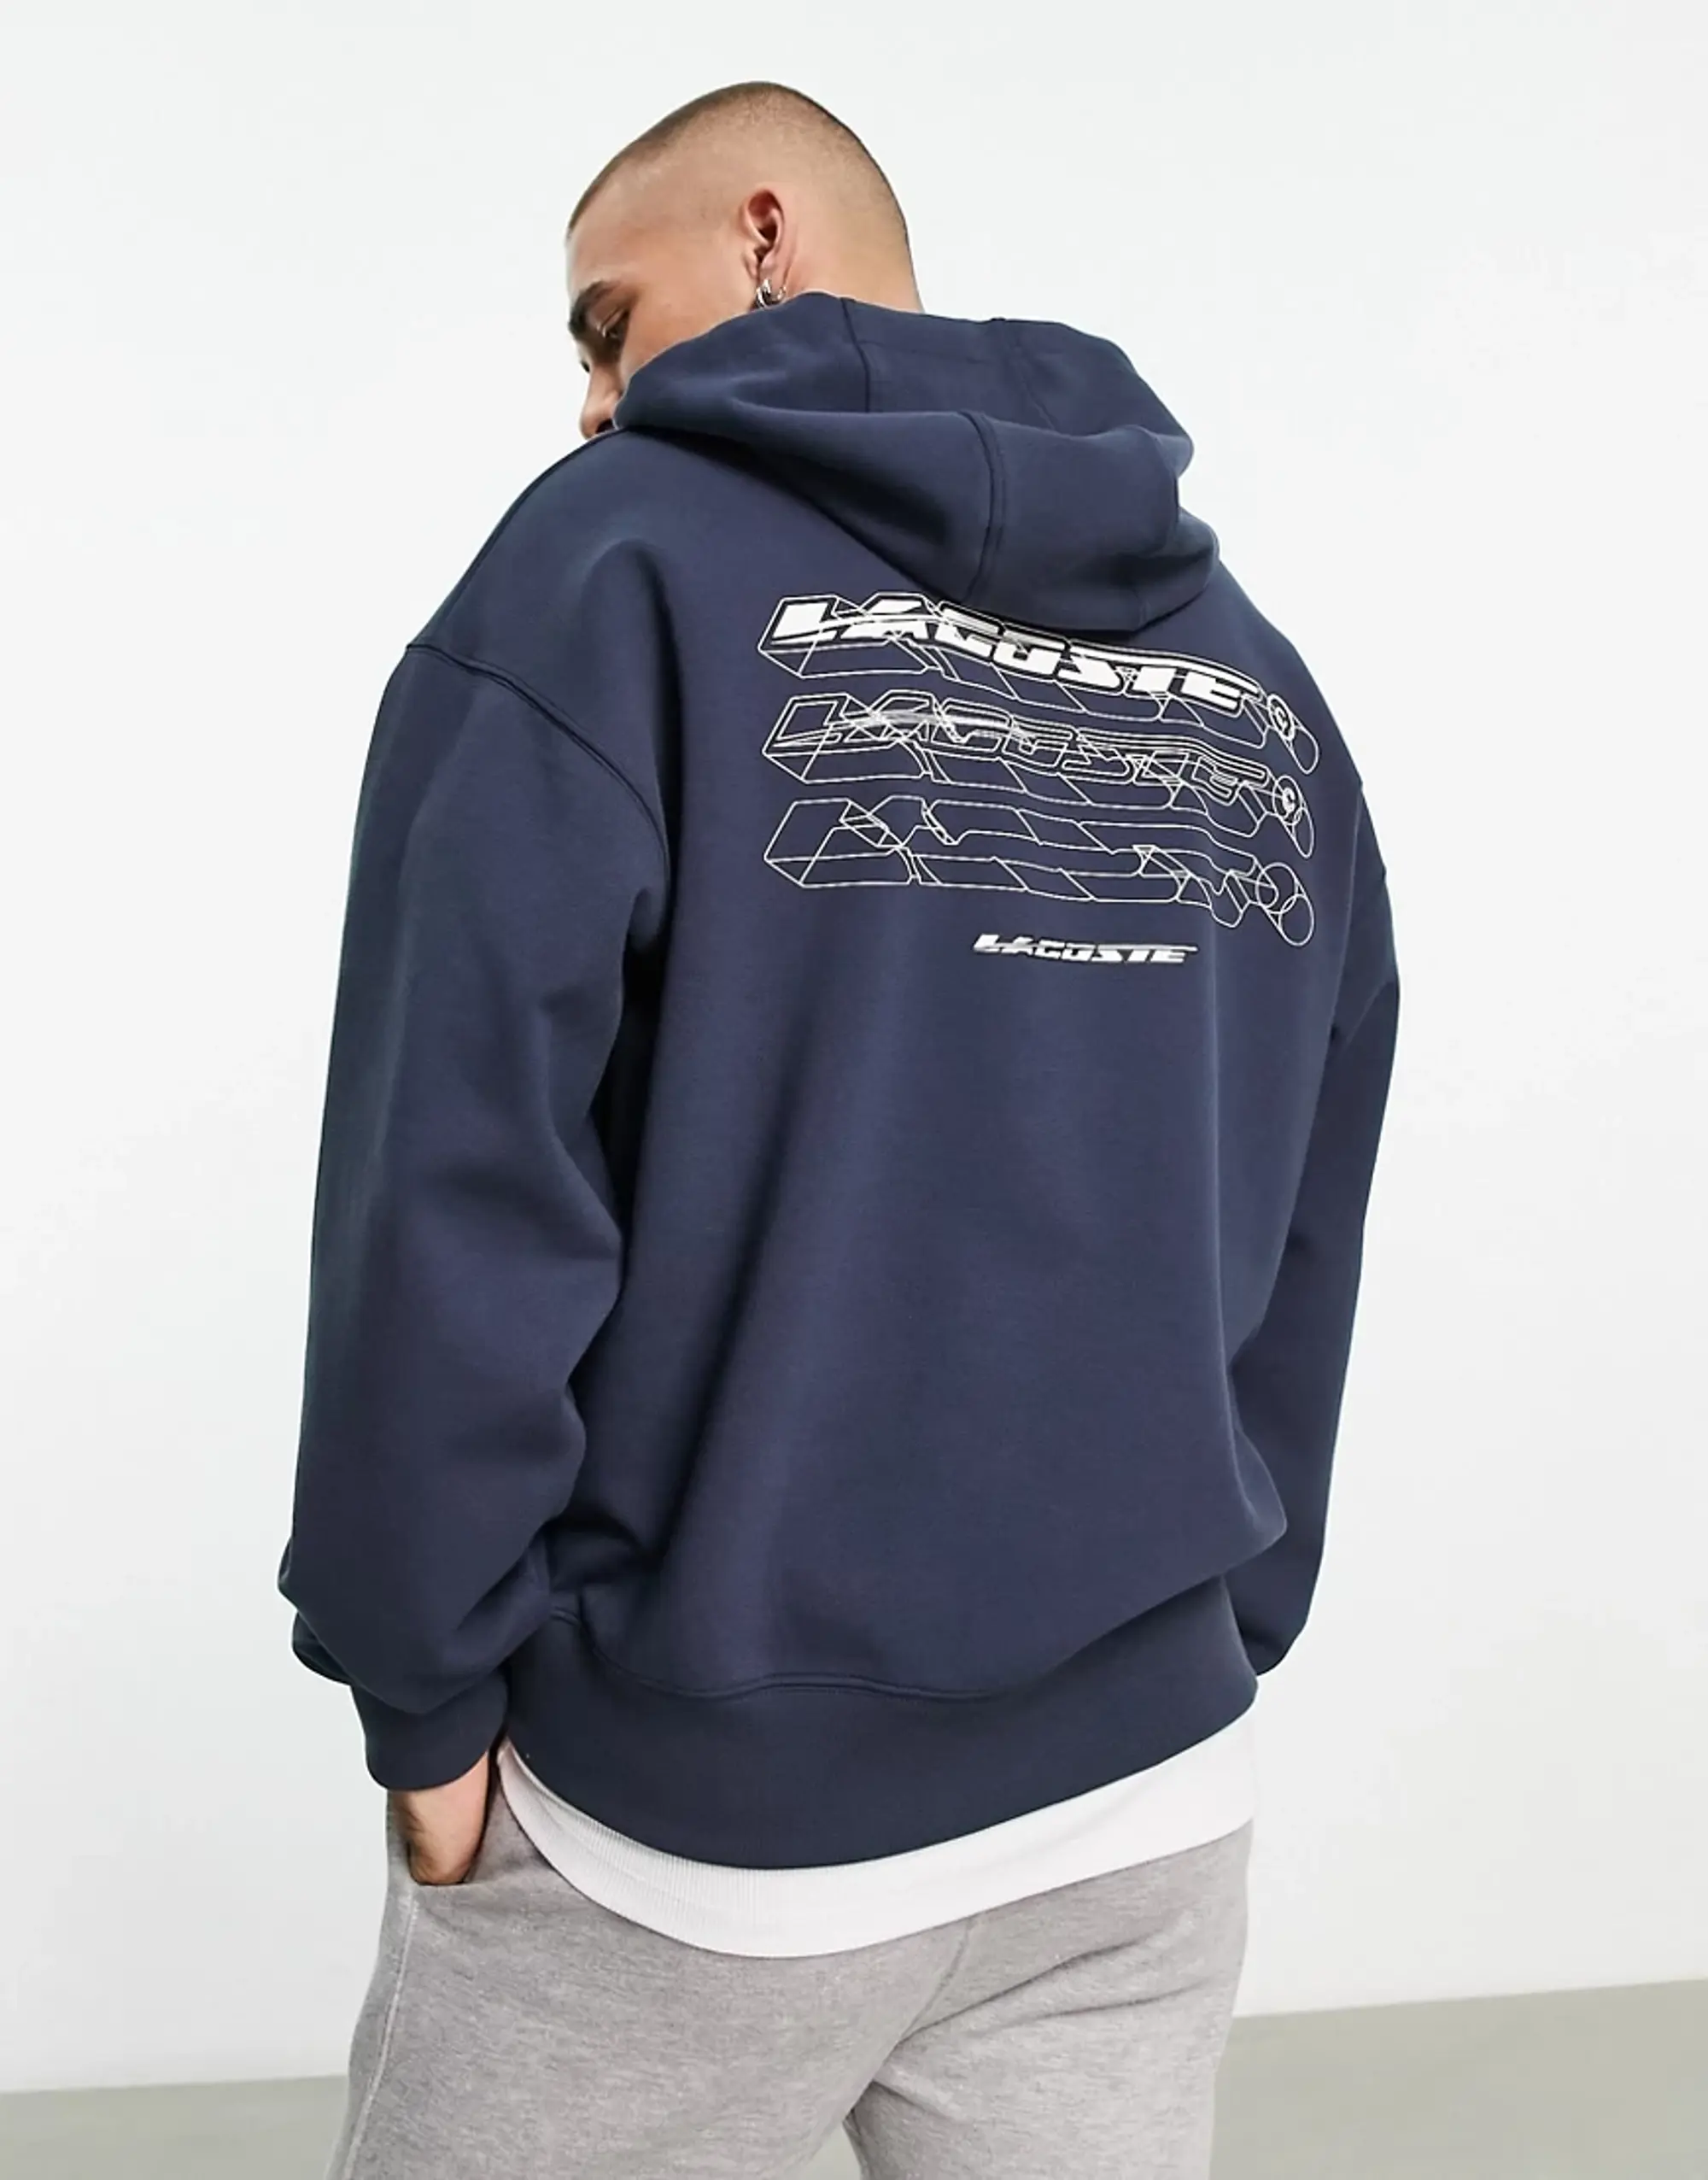 Lacoste Loose Fit 1/4 Zip Hoodie In Navy With Back Graphics